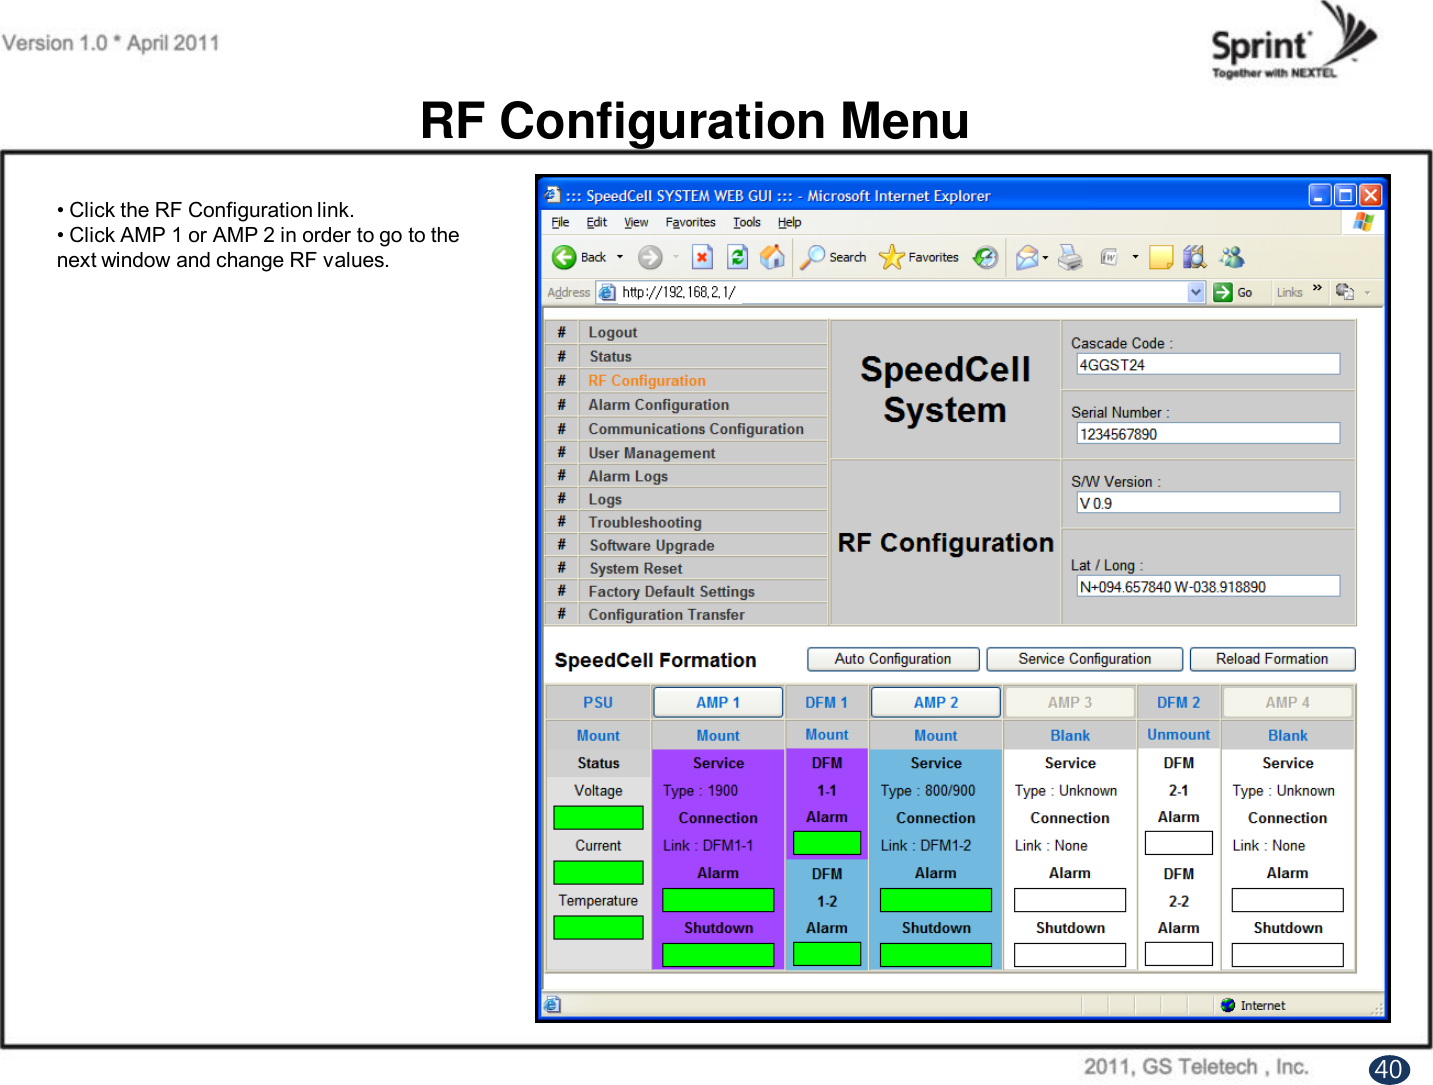 RF Configuration Menu• Click the RF Configuration link.• Click AMP 1 or AMP 2 in order to go to the next window and change RF values. 40